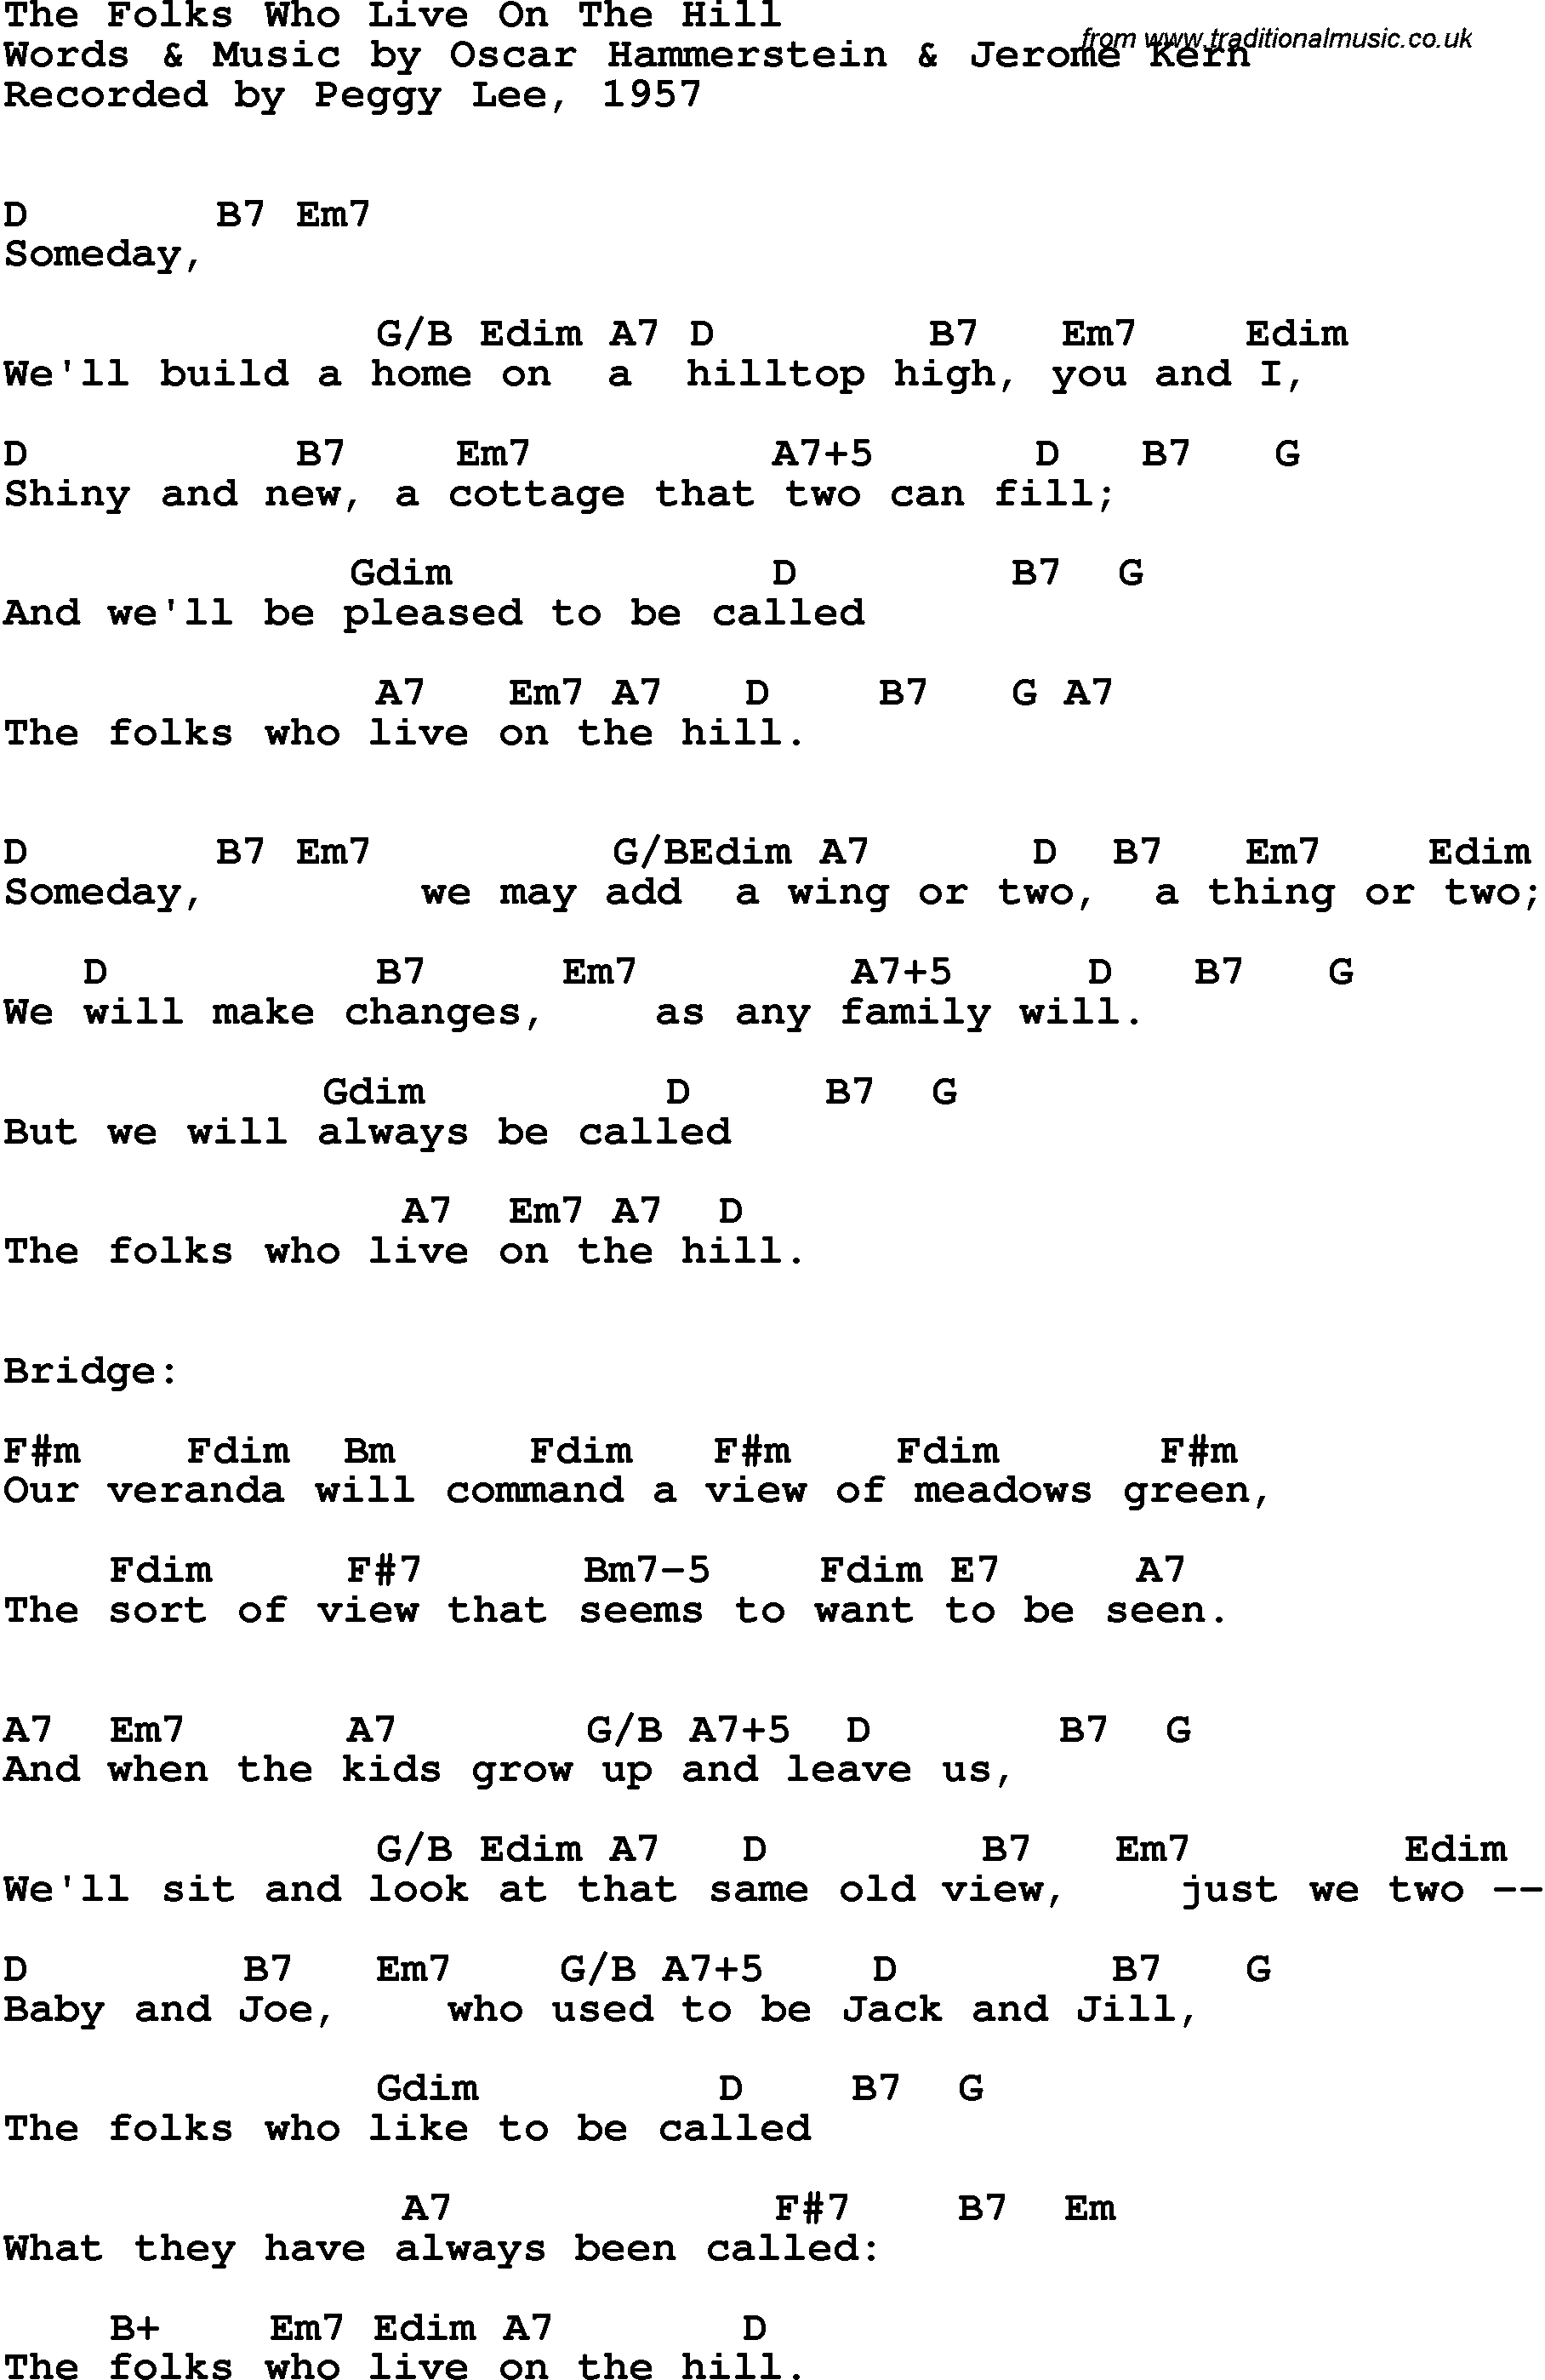 Song Lyrics with guitar chords for Folks Who Live On The Hill, The - Peggy Lee, 1957